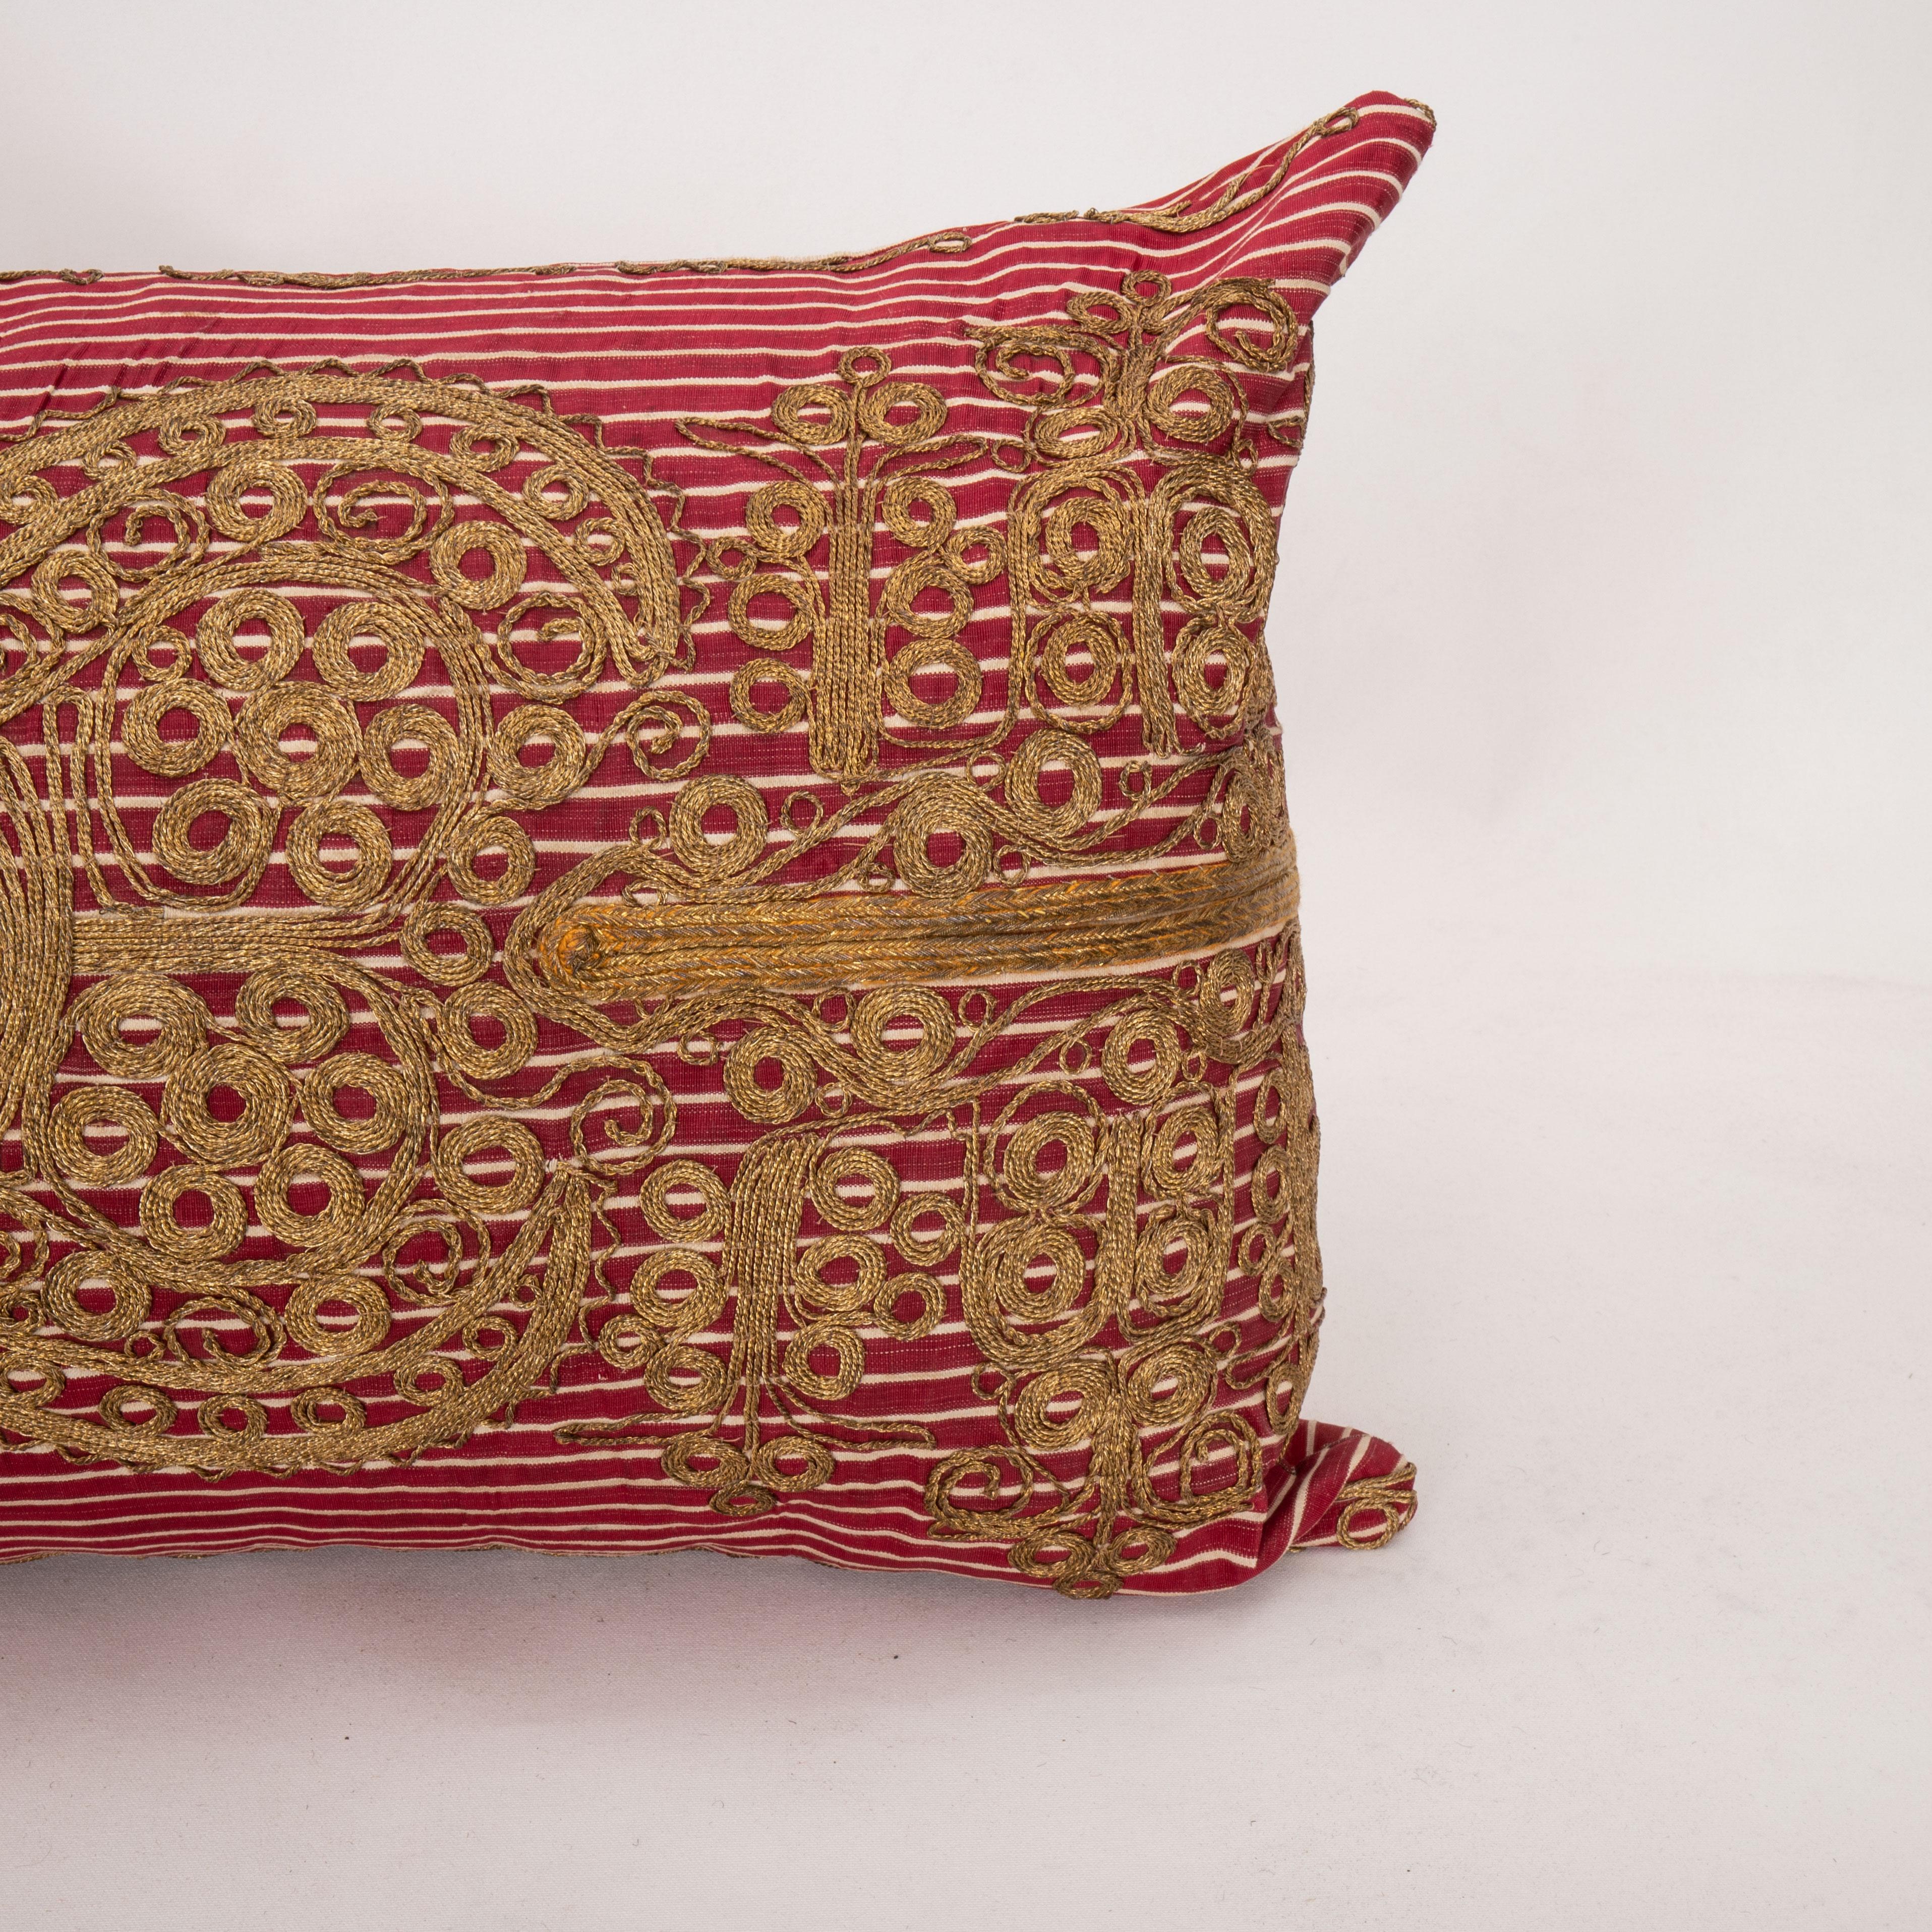 Antique Ottoman Turkish Pillow Case, Early 20th C. In Good Condition For Sale In Istanbul, TR